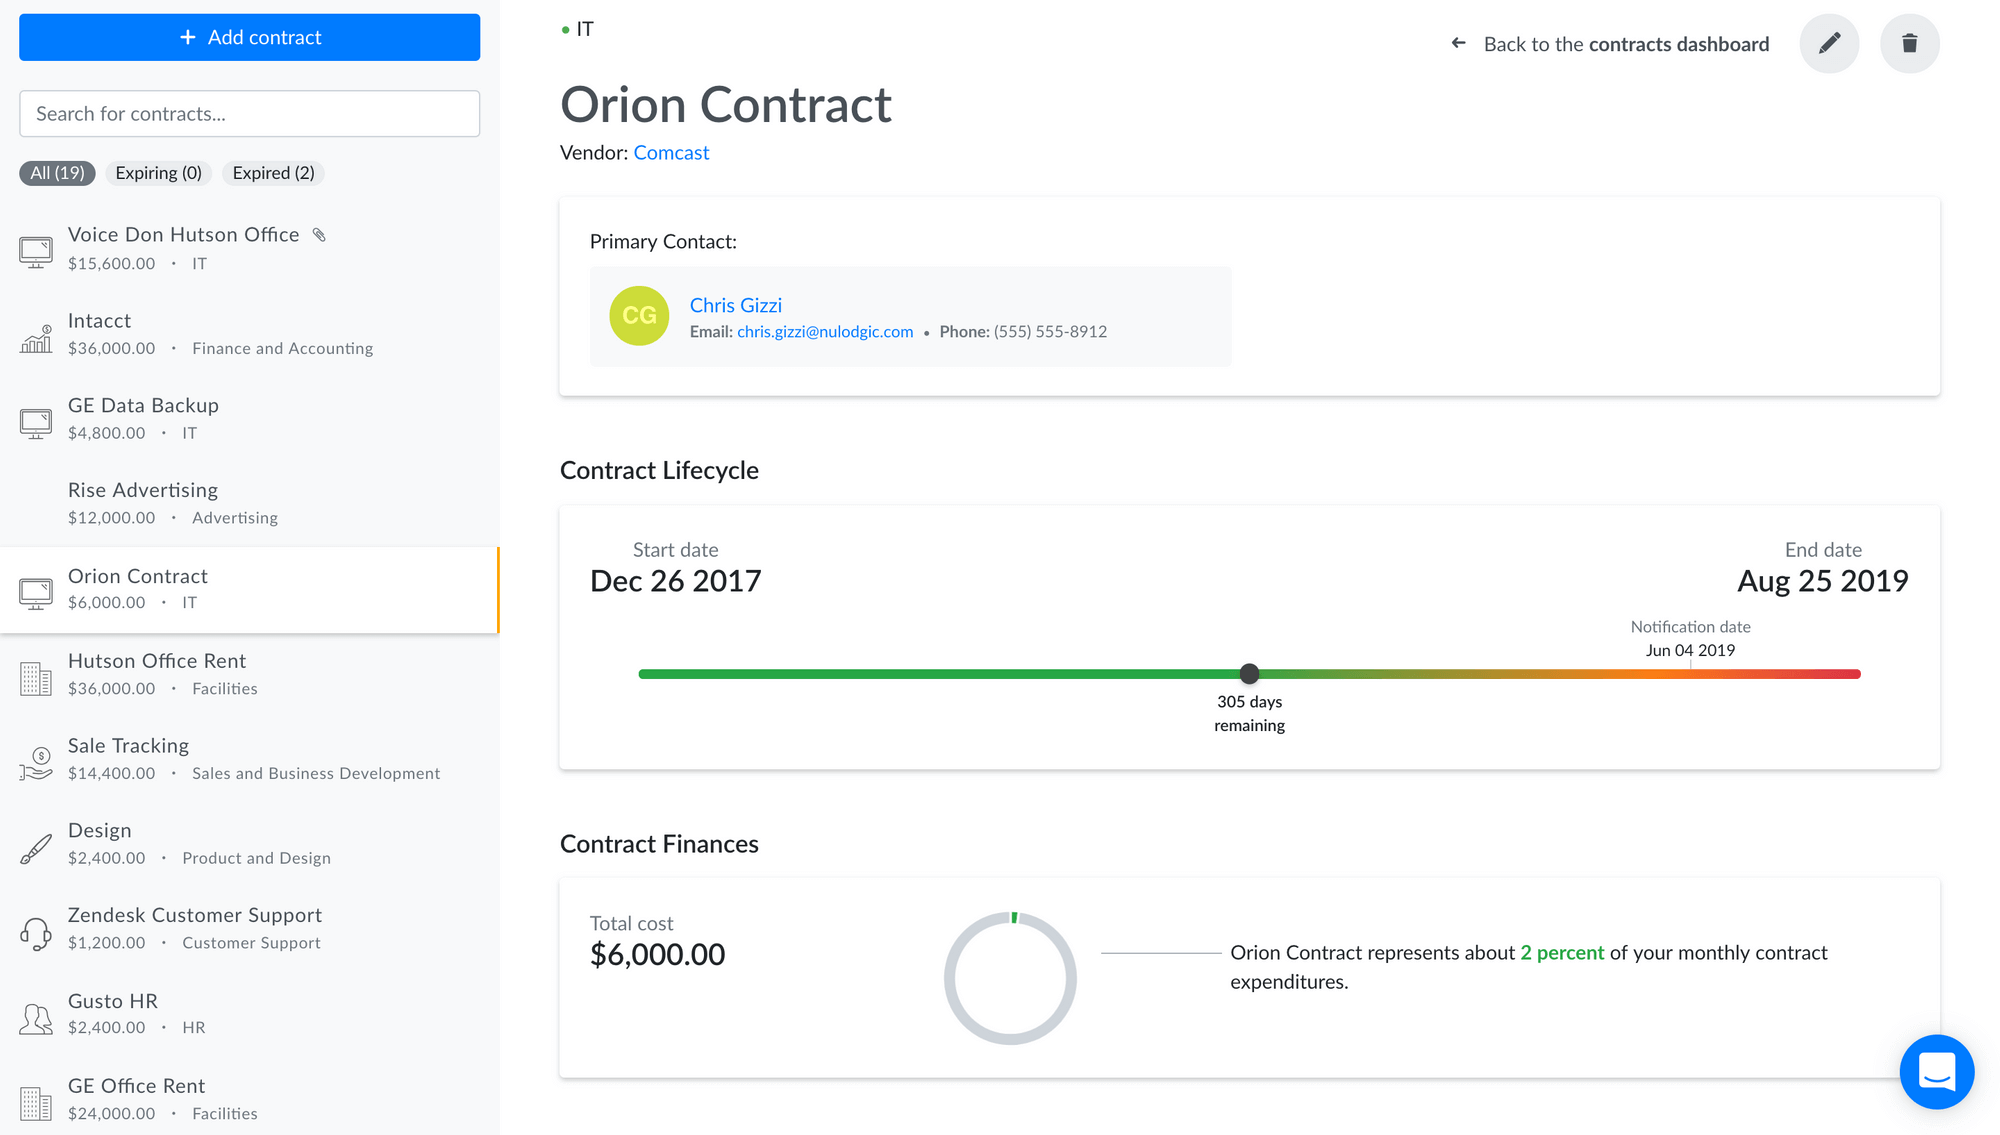 Contracts Show Page